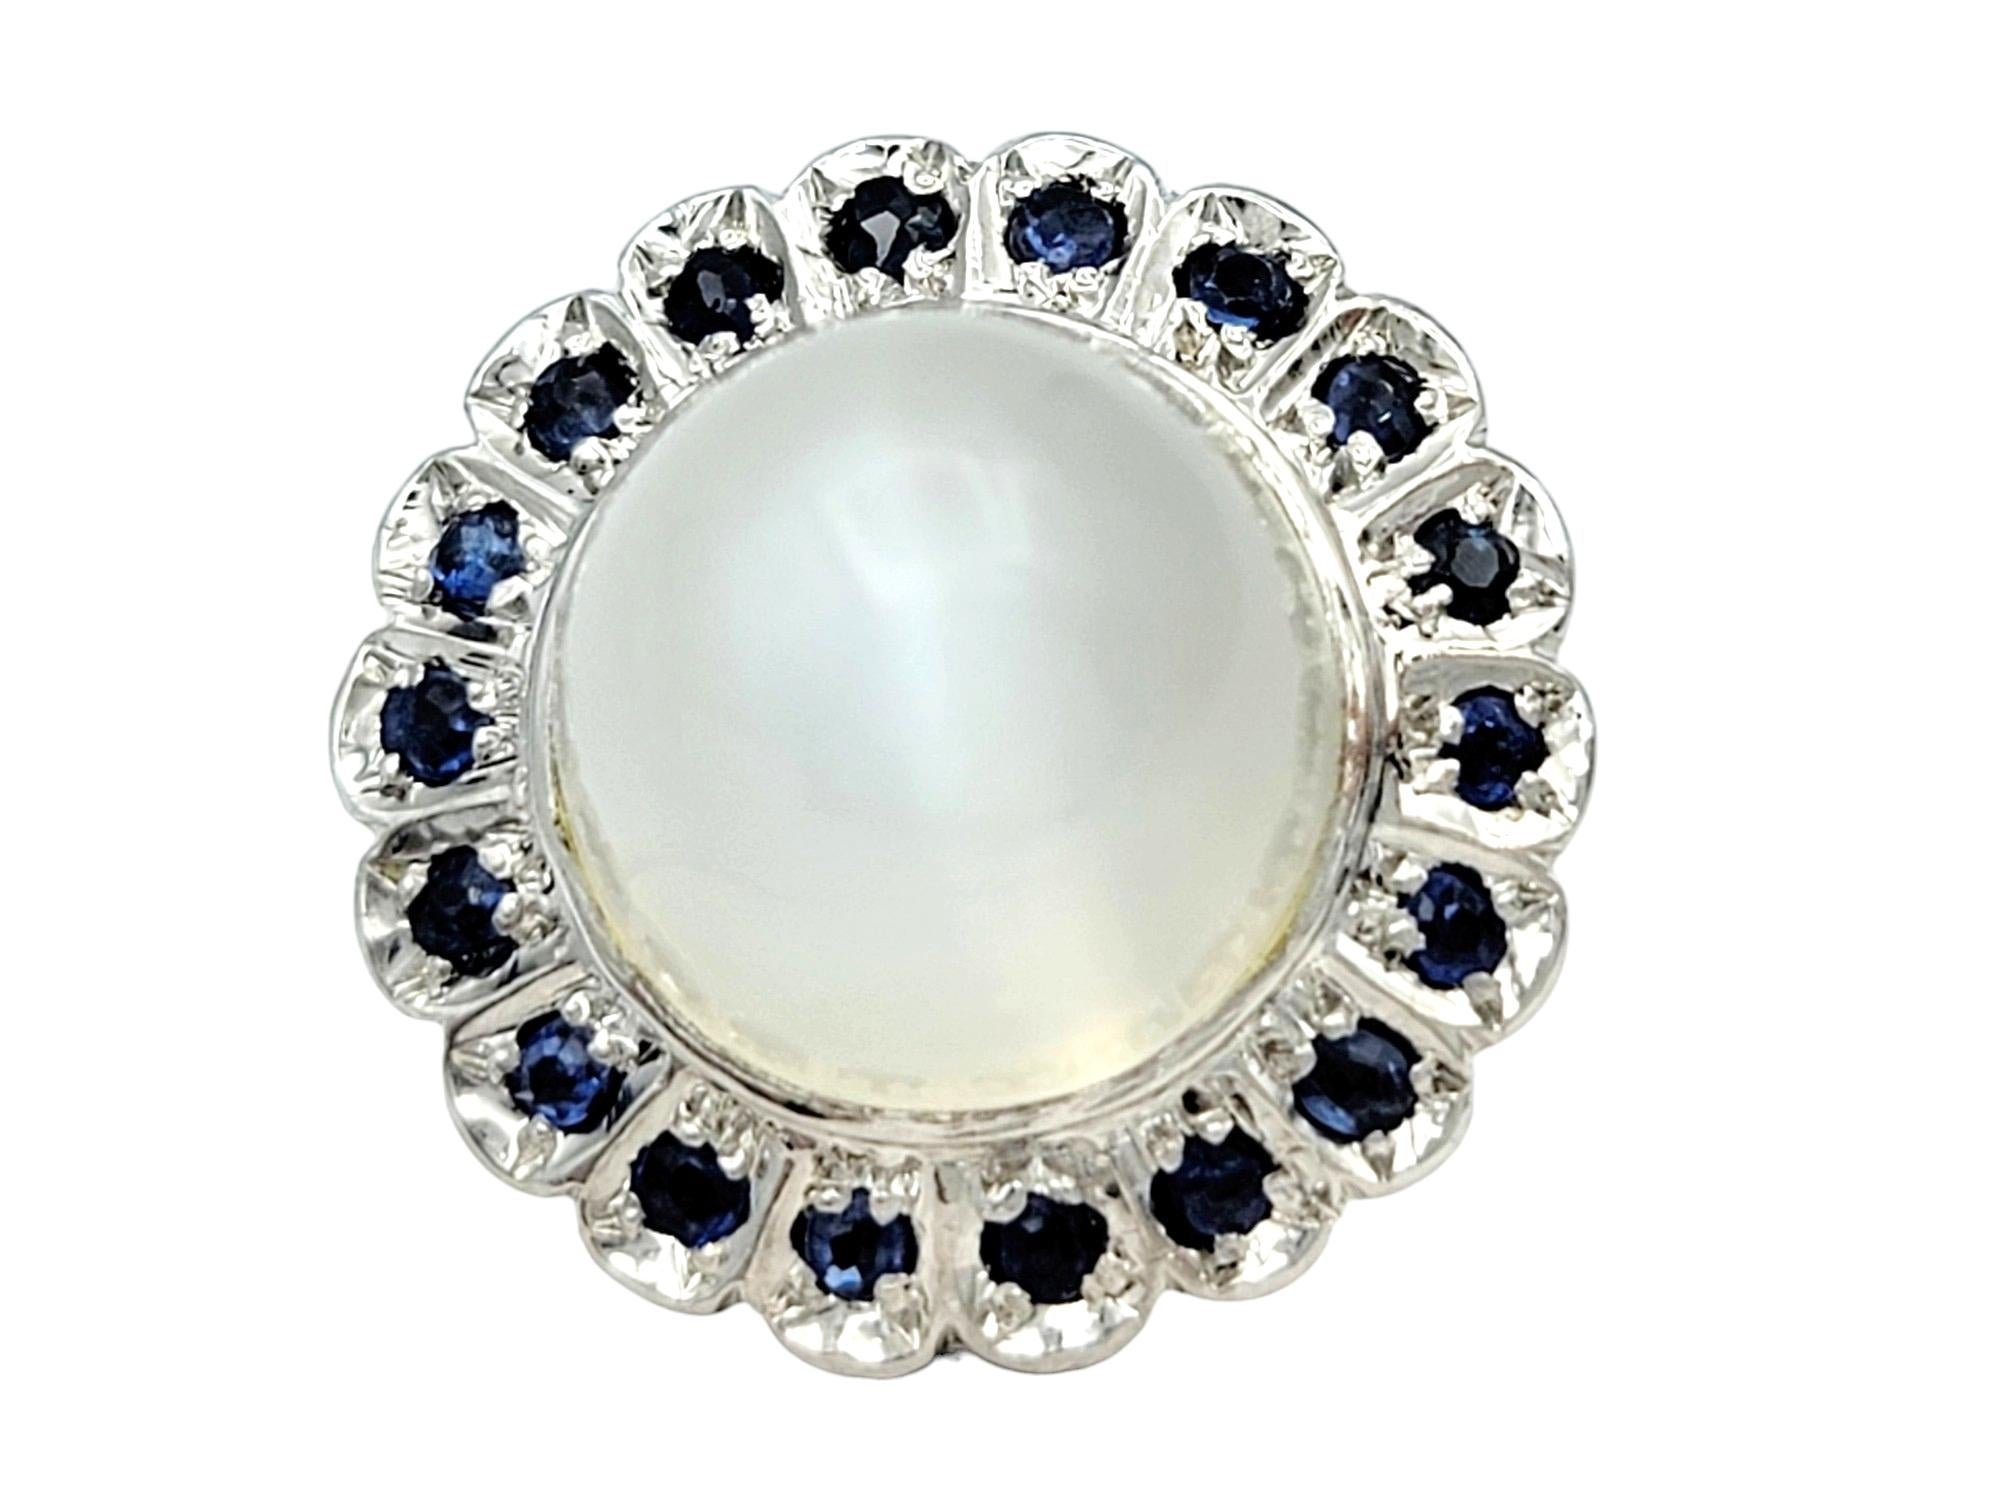 Cabochon Moonstone Domed Cocktail Ring with Sapphire Halo in 10 Karat White Gold In Good Condition For Sale In Scottsdale, AZ